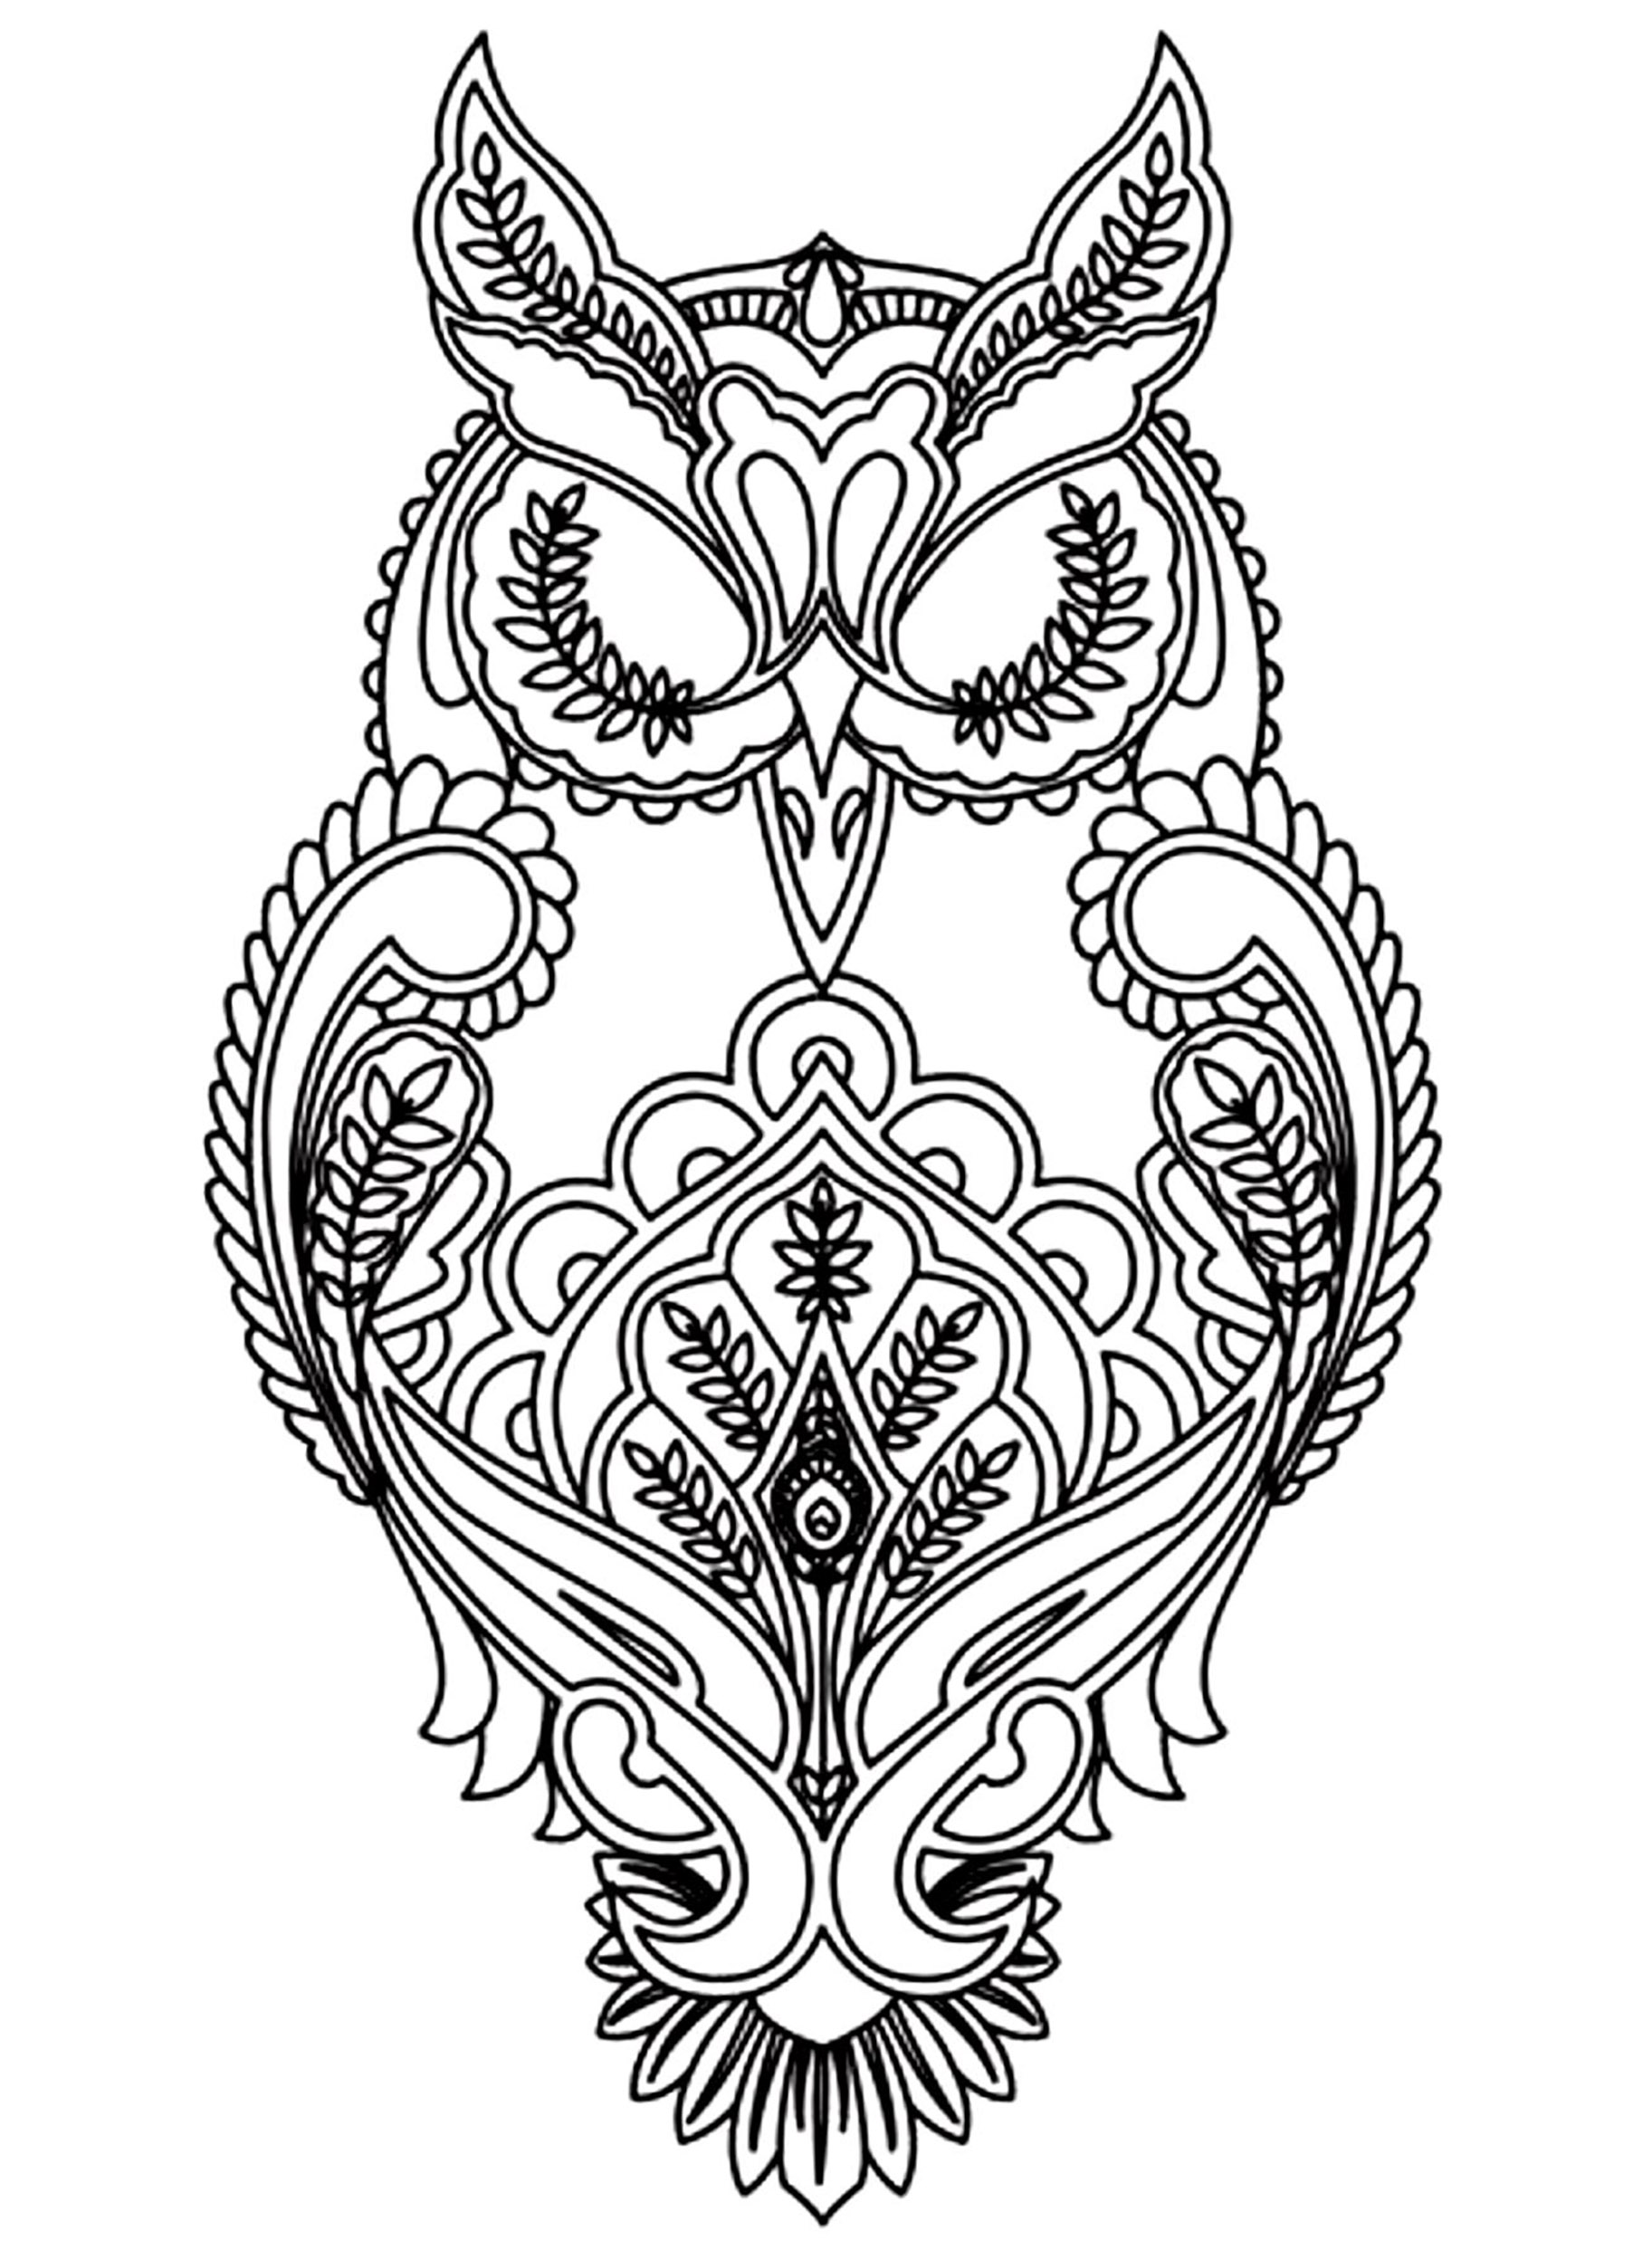 Owls to download - Owls Kids Coloring Pages